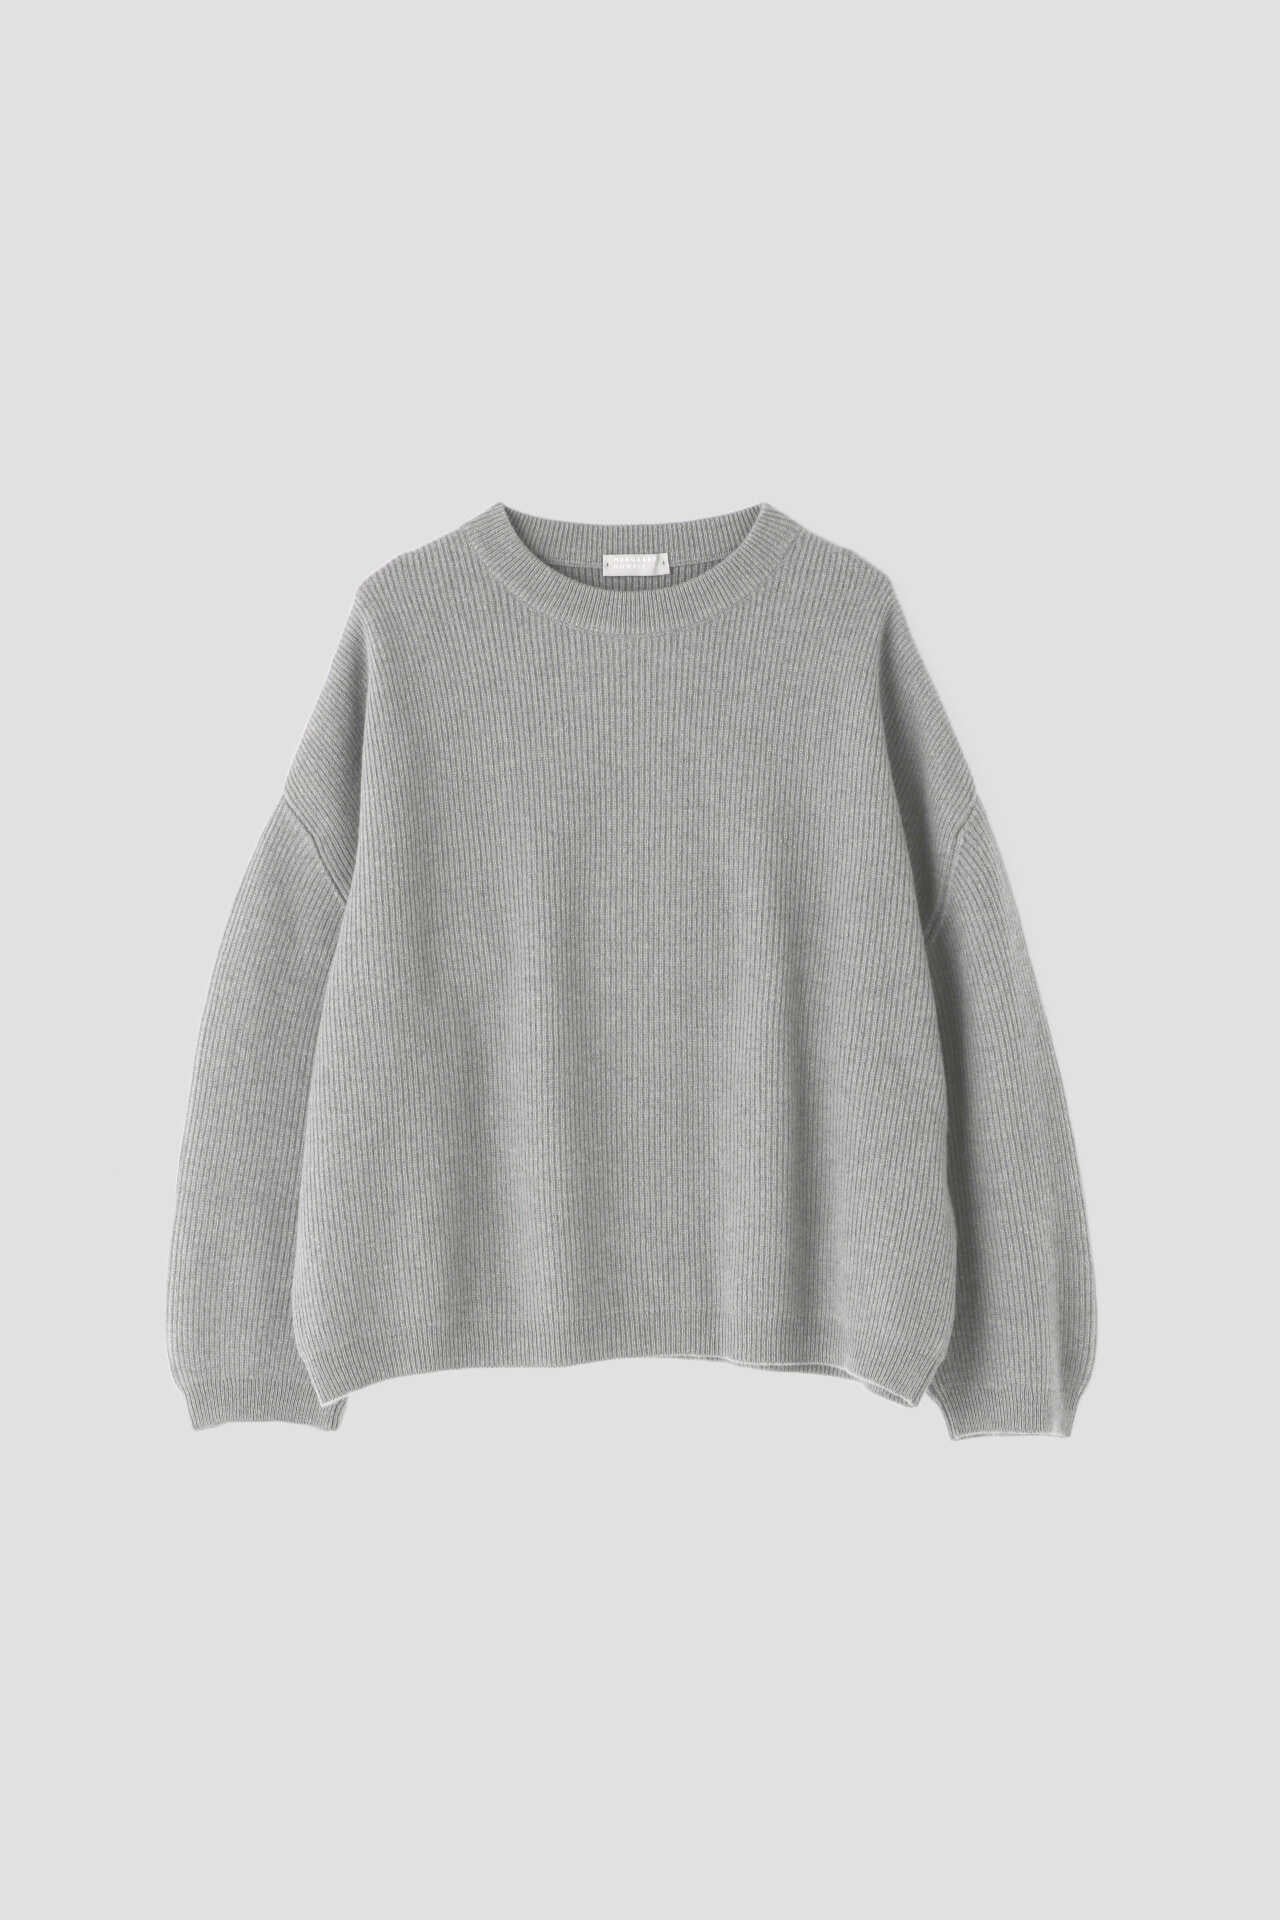 WOOL CASHMERE | MARGARET HOWELL